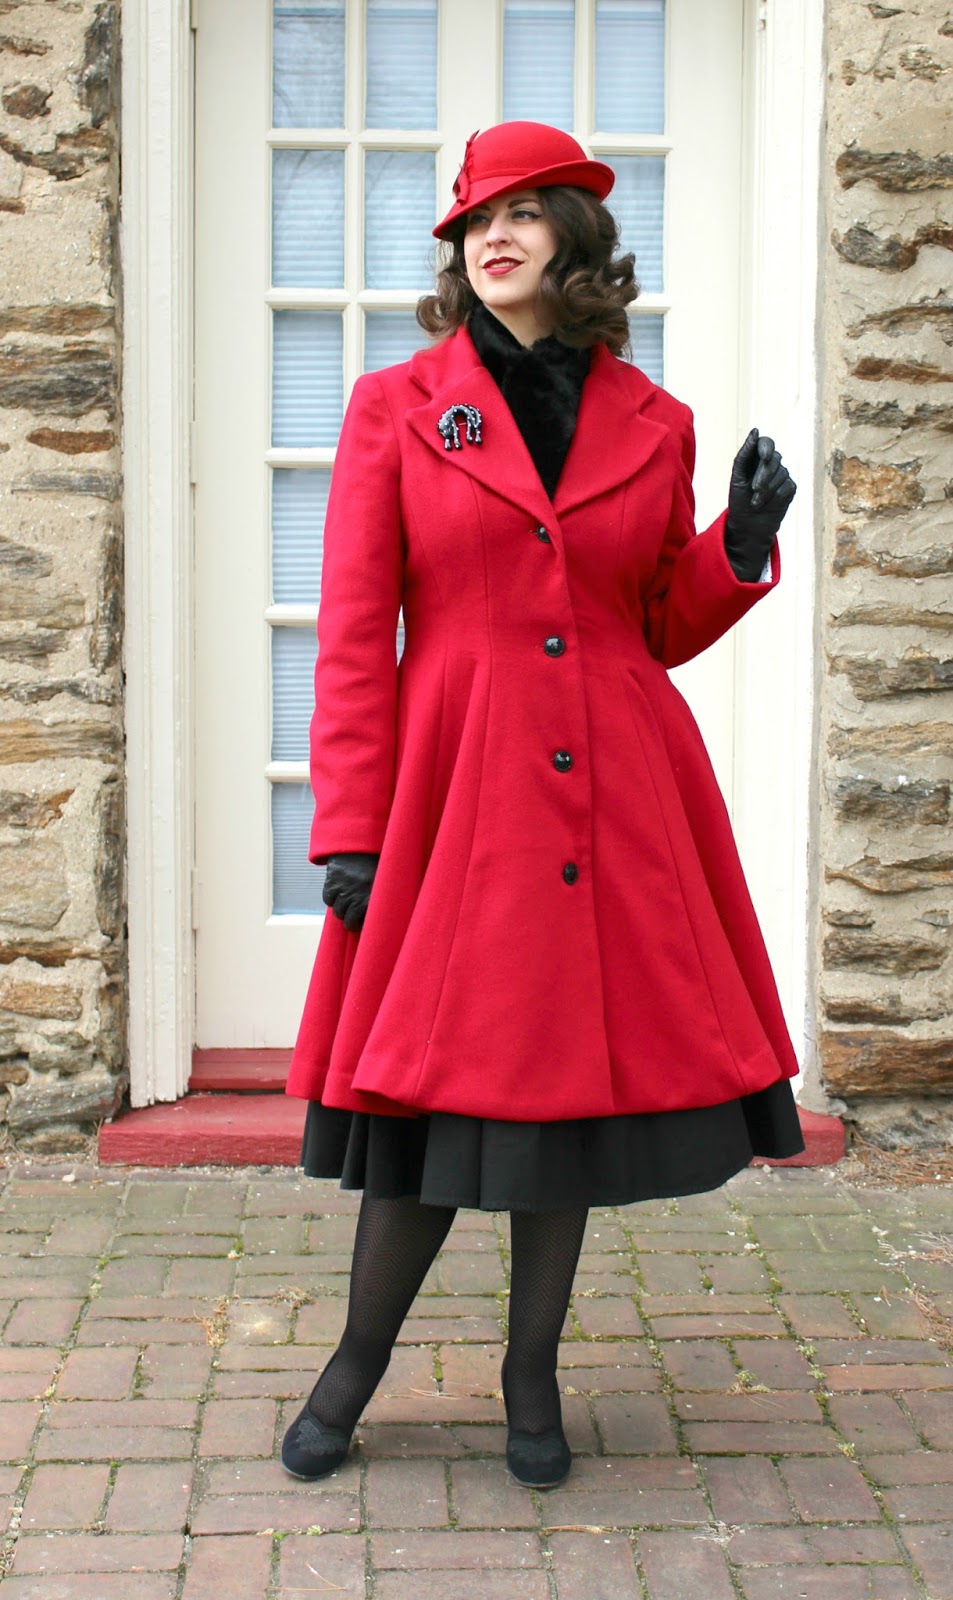 Handmade By Heather B: Lady in Red - McCalls 6800